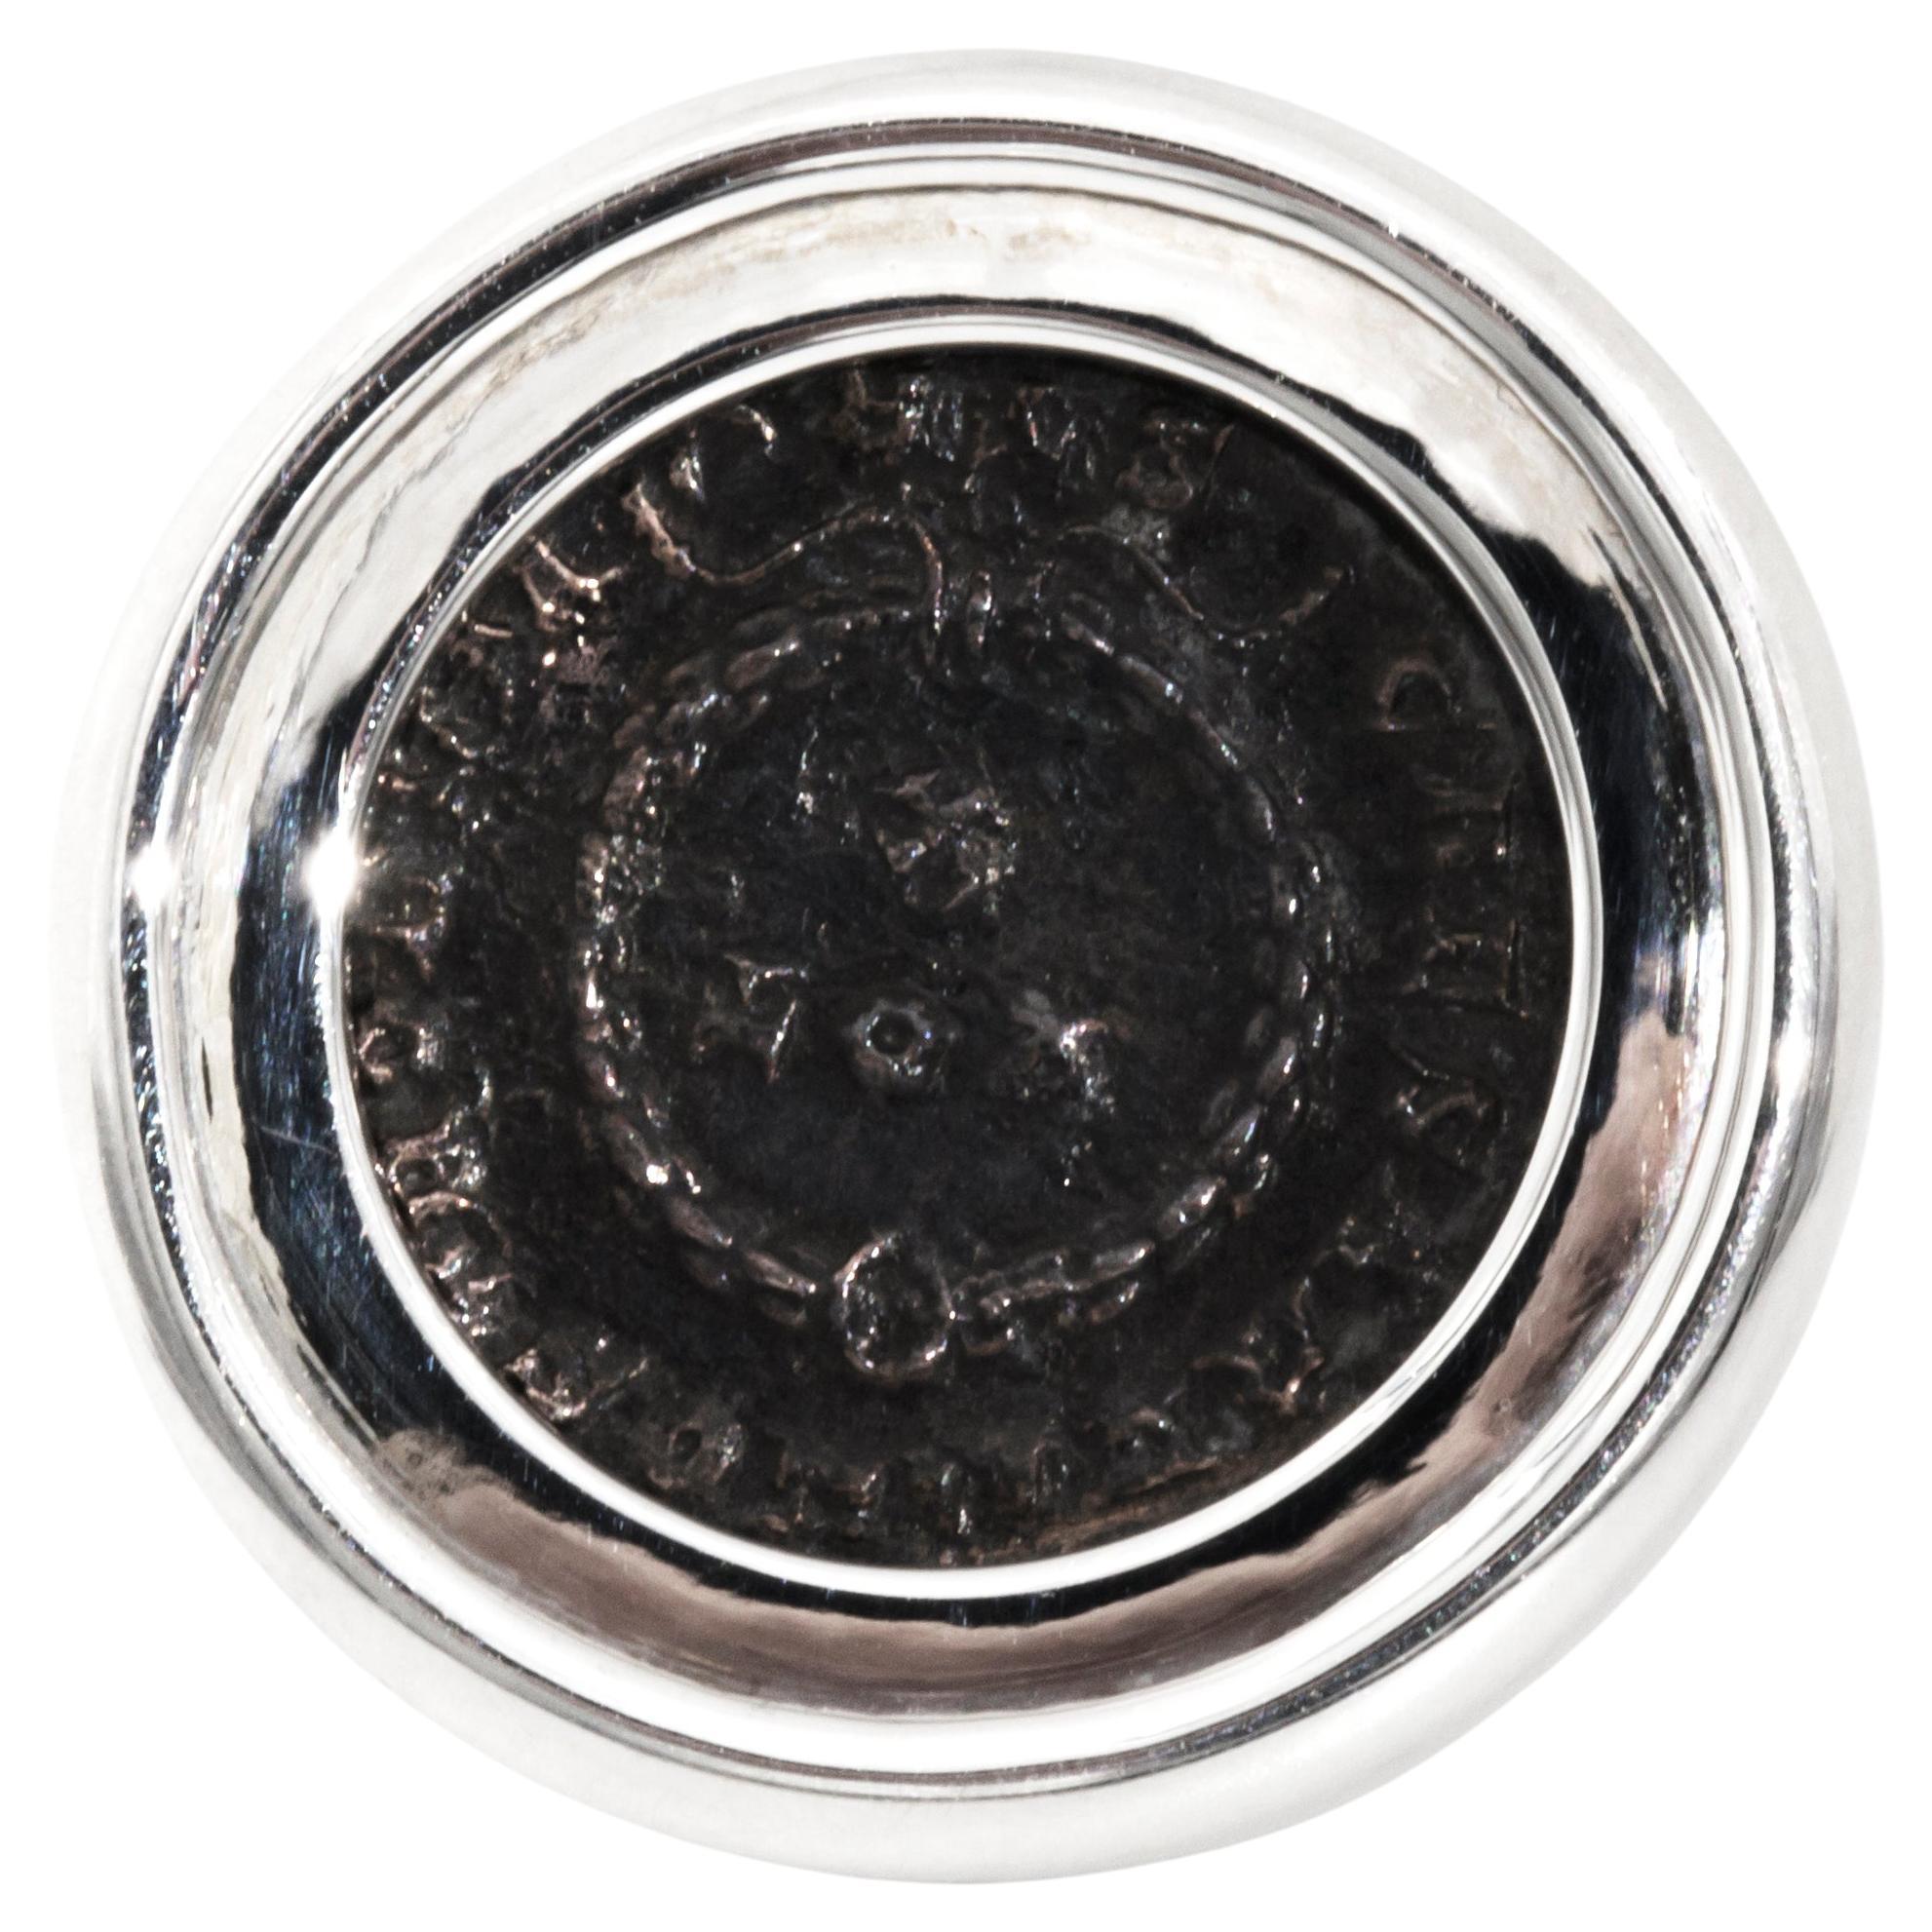 Emperor Crispus and Divine Vow Ancient Coin Sterling Silver Signet Ring